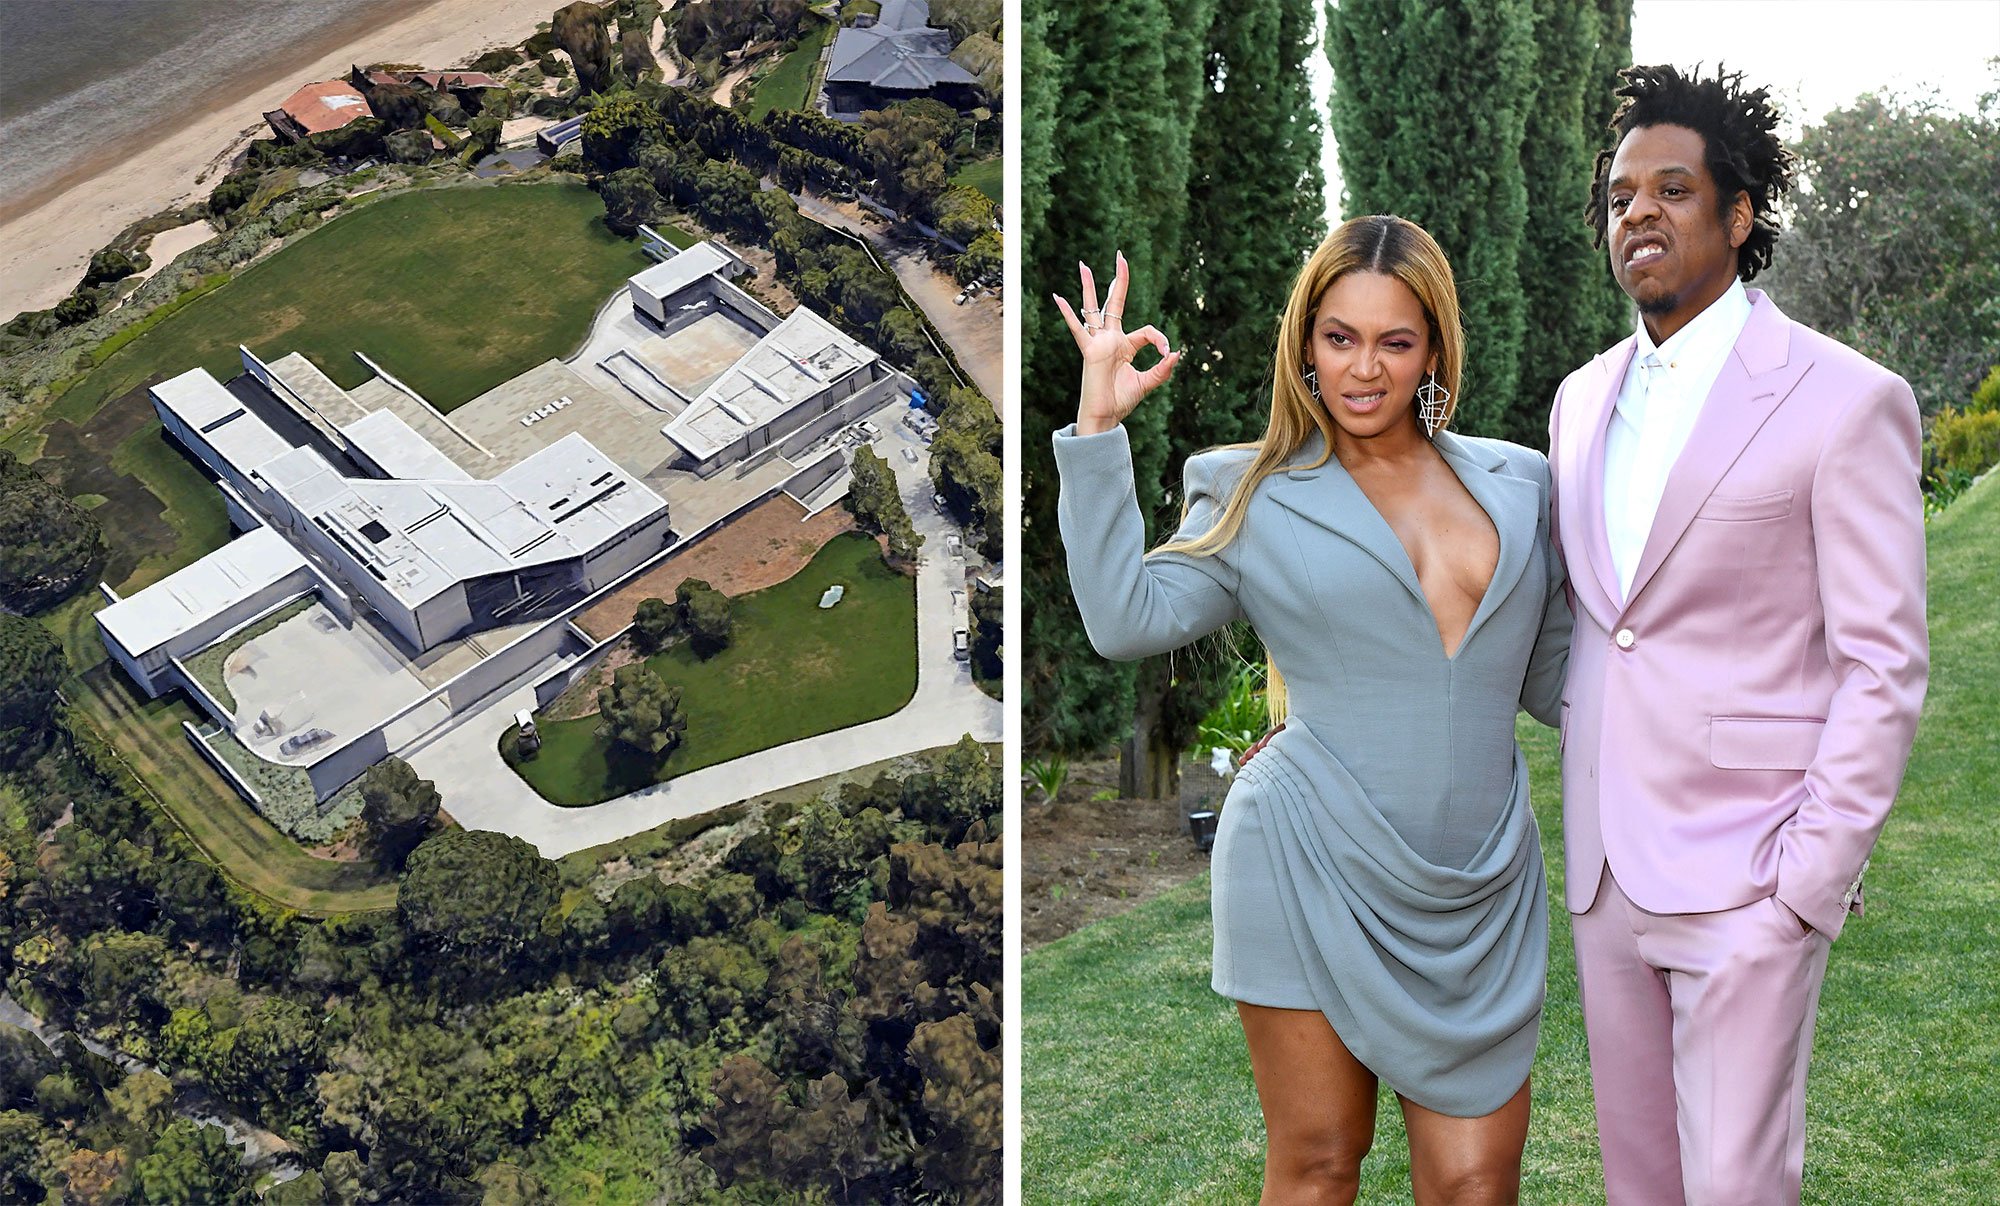 Beyoncé and Jay-Z's New $200 Million Home by Famed Architect Tadao Ando Is  the Most Expensive in California—Maybe Even America